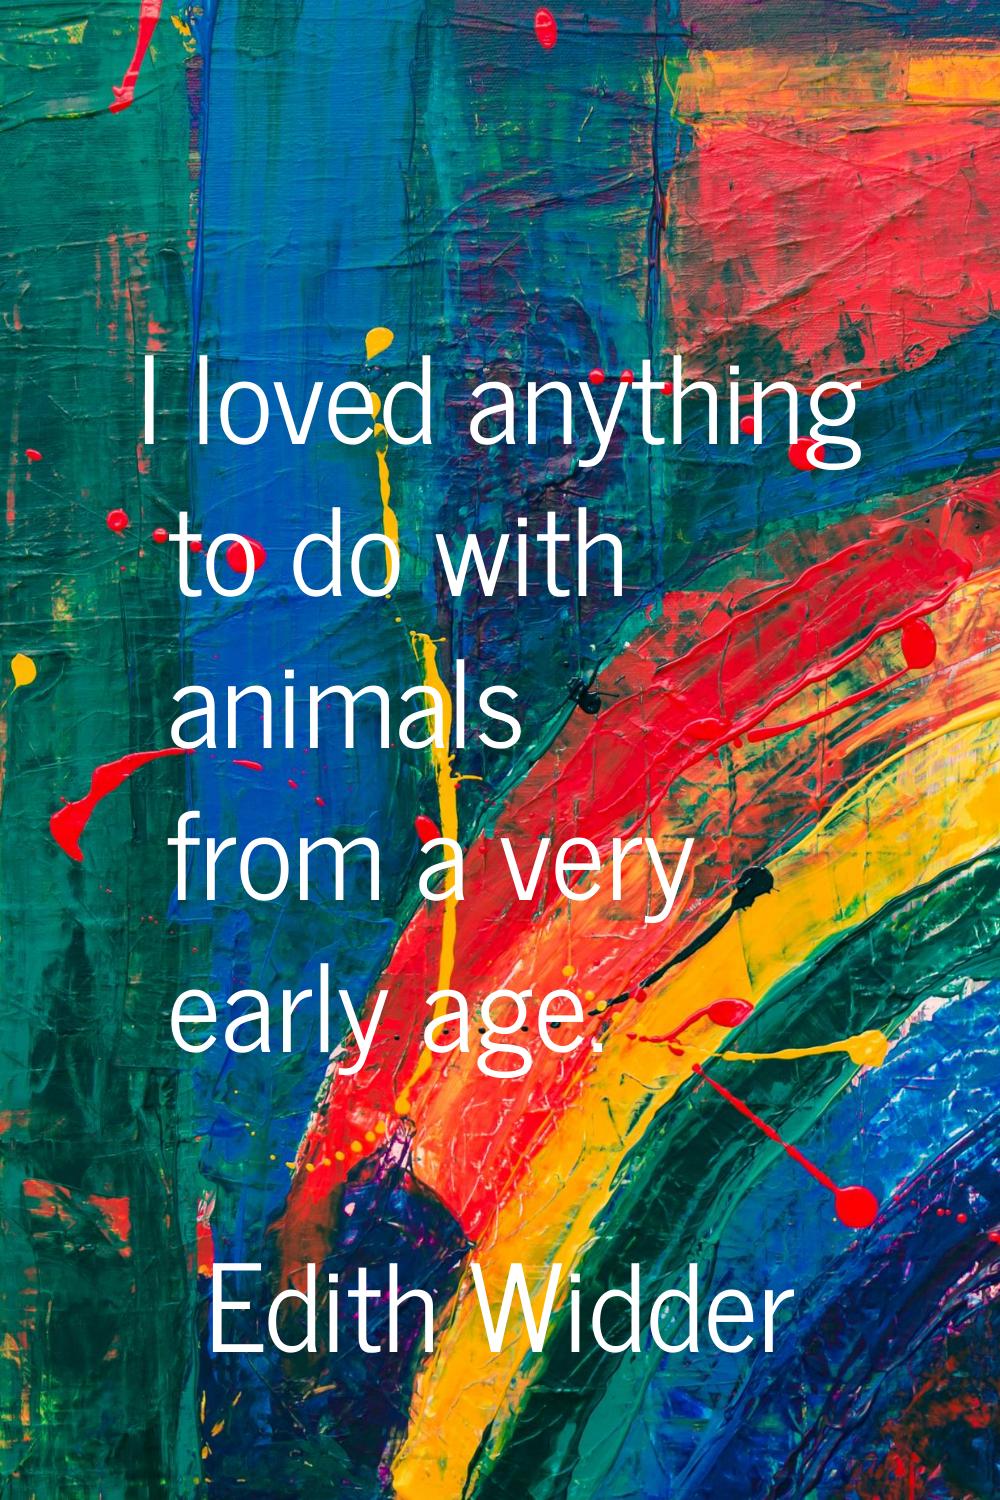 I loved anything to do with animals from a very early age.